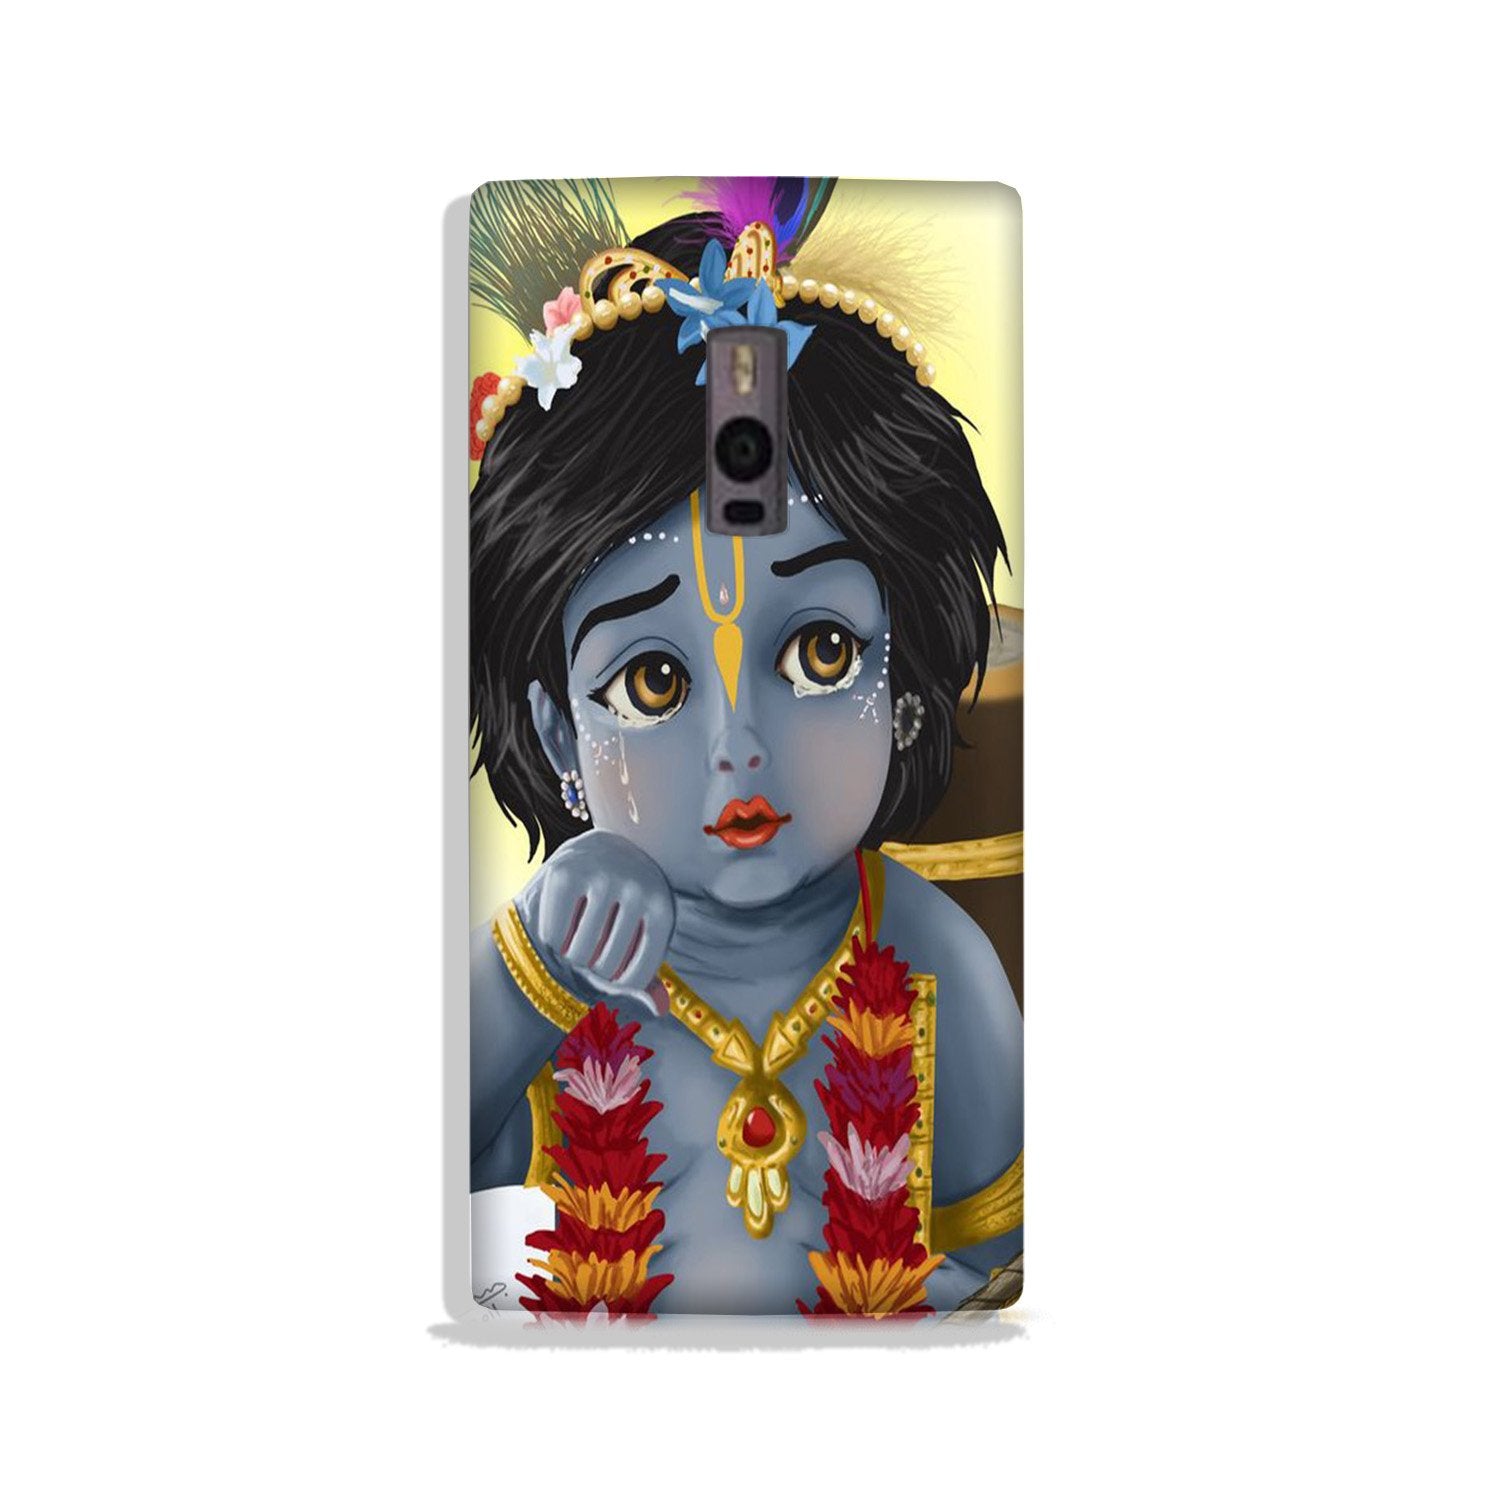 Bal Gopal Case for OnePlus 2